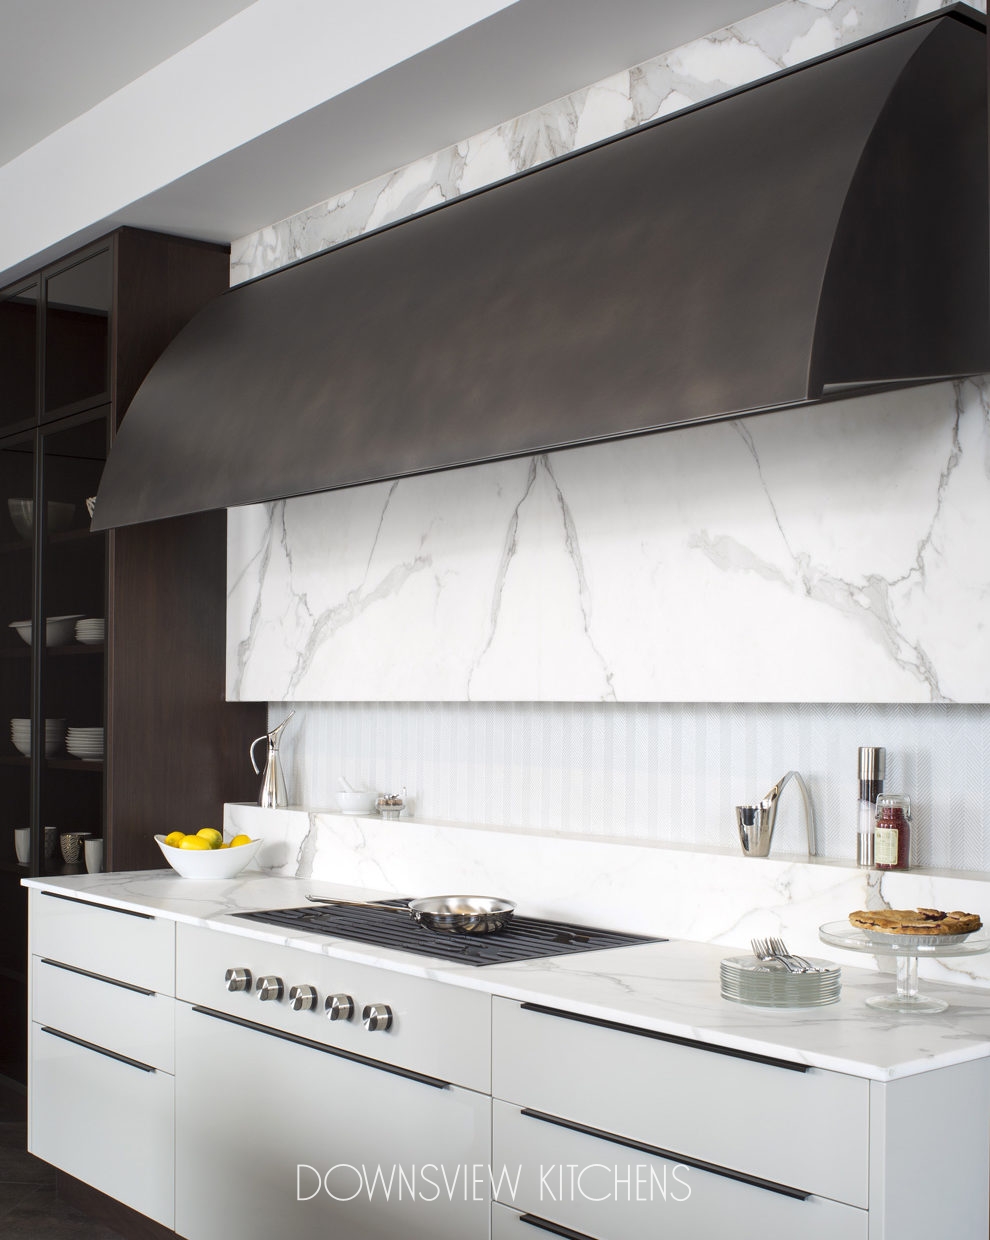 DESIGN THEORY - Downsview Kitchens and Fine Custom Cabinetry ...